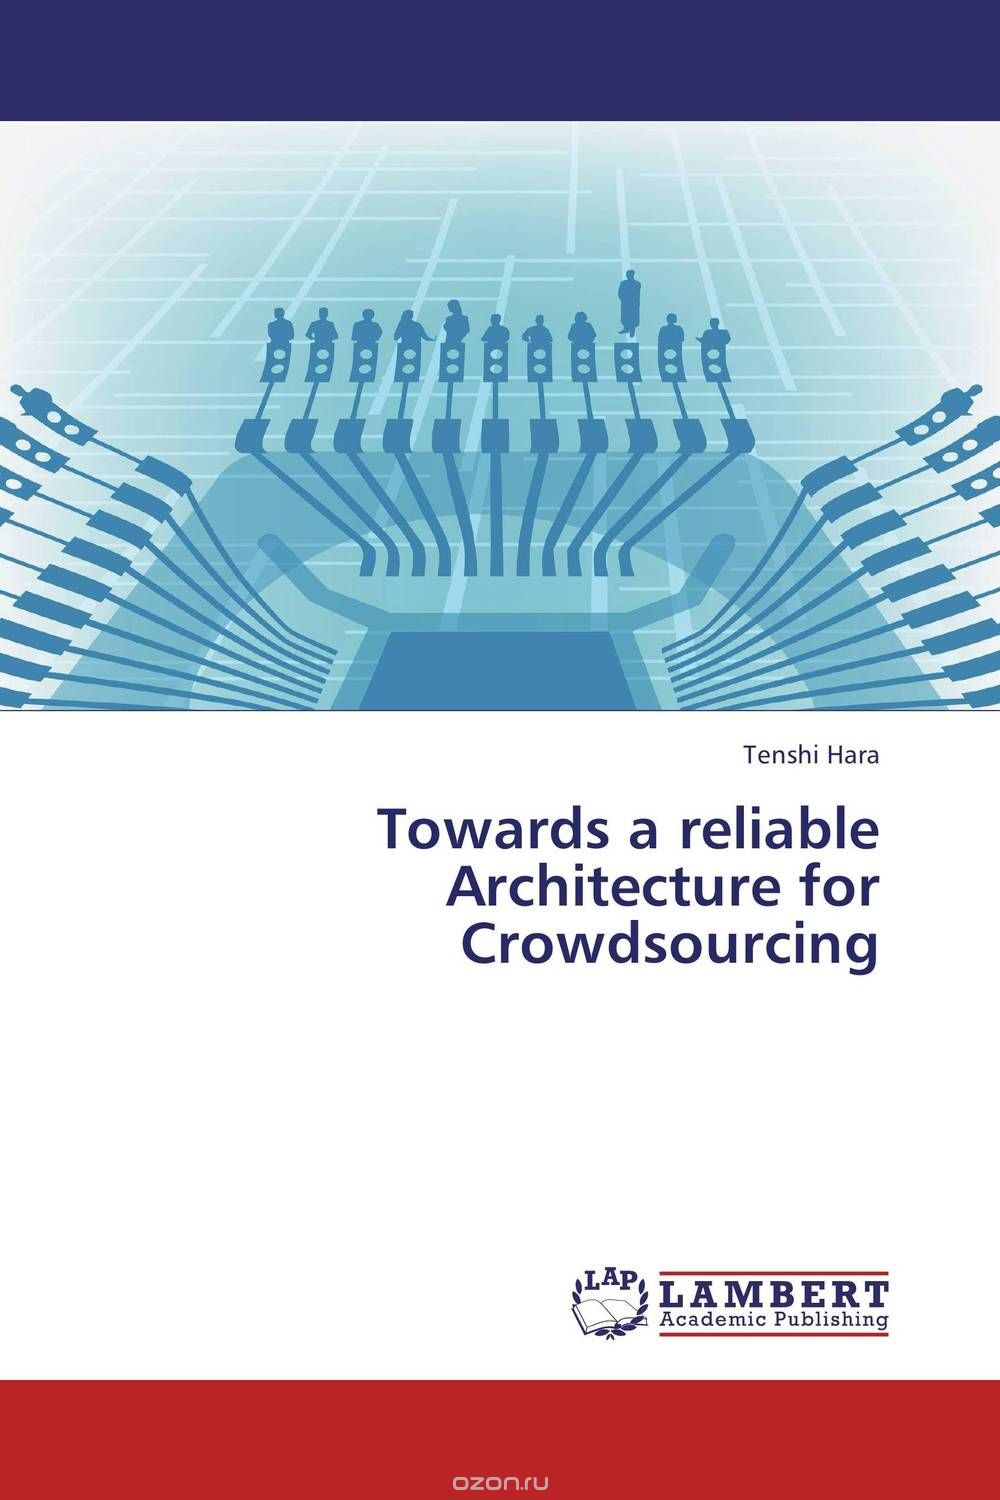 Towards a reliable Architecture for Crowdsourcing